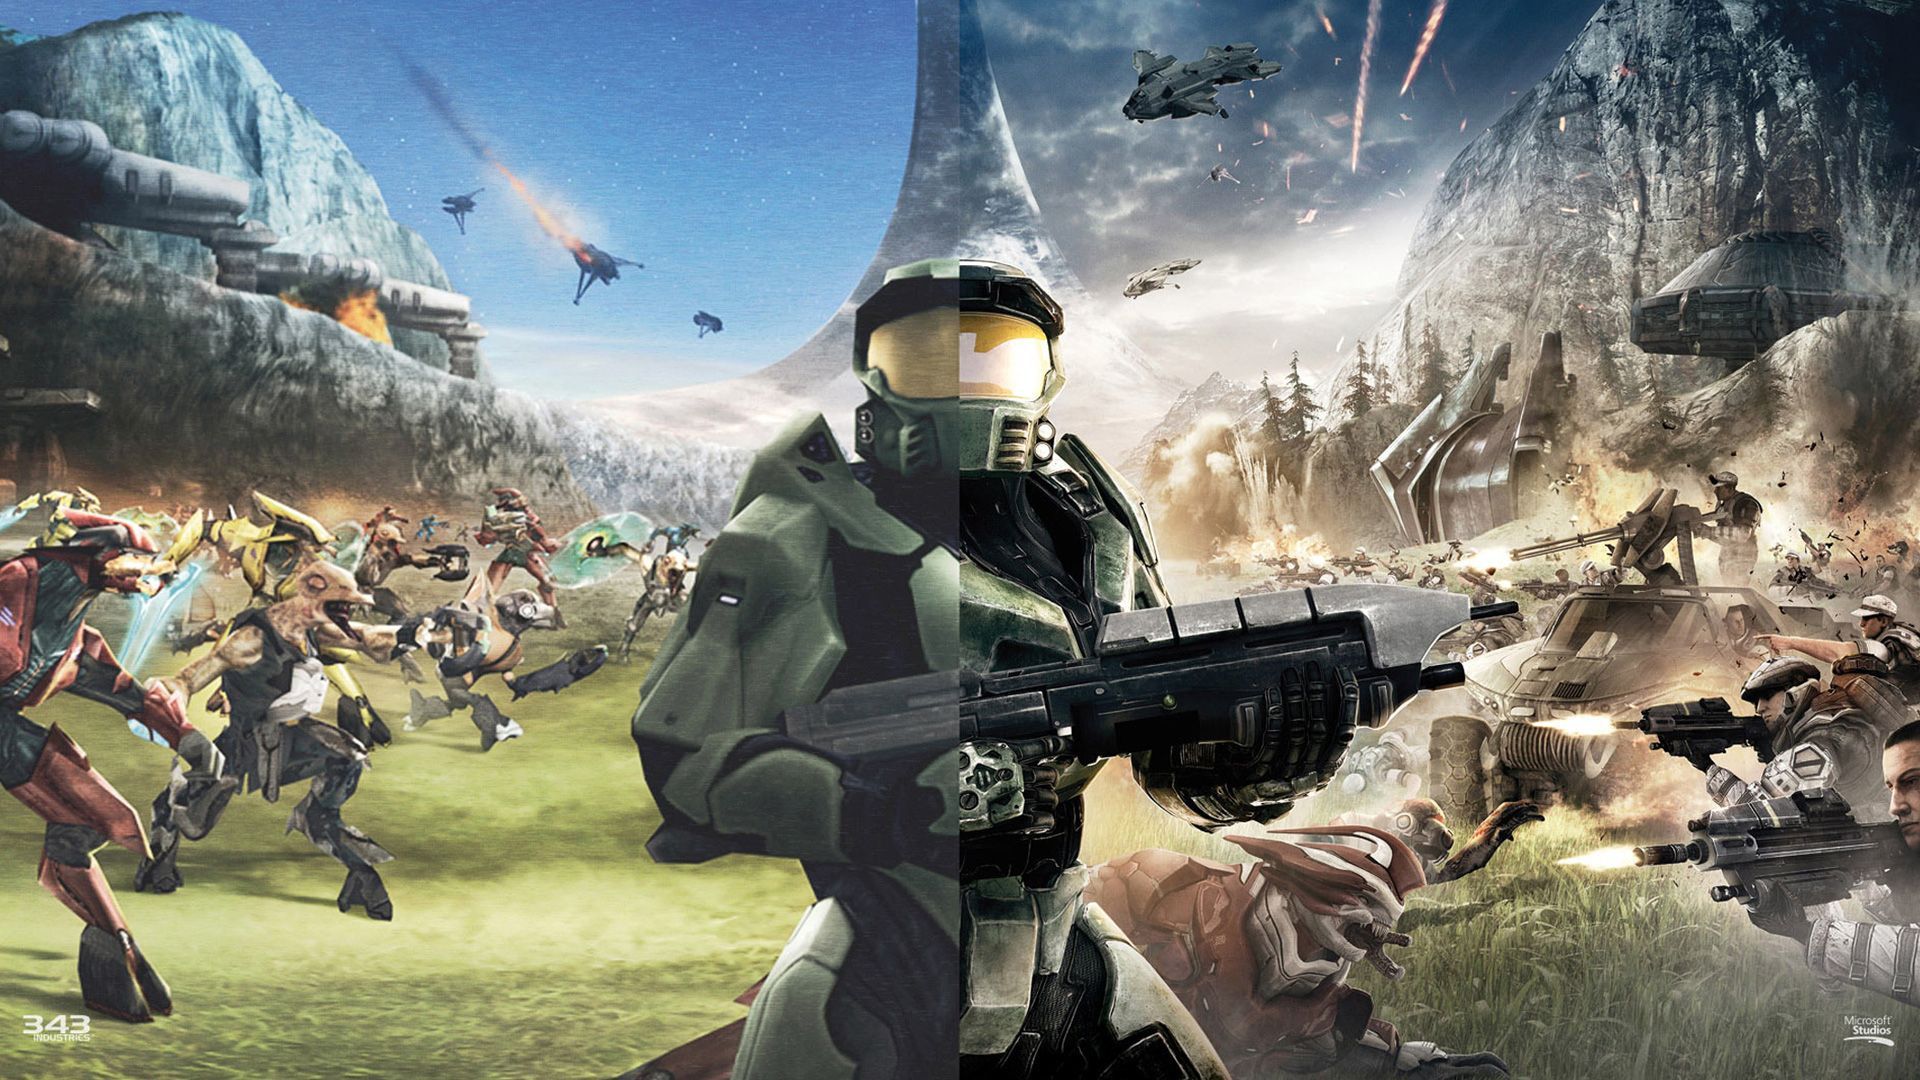 Halo Images